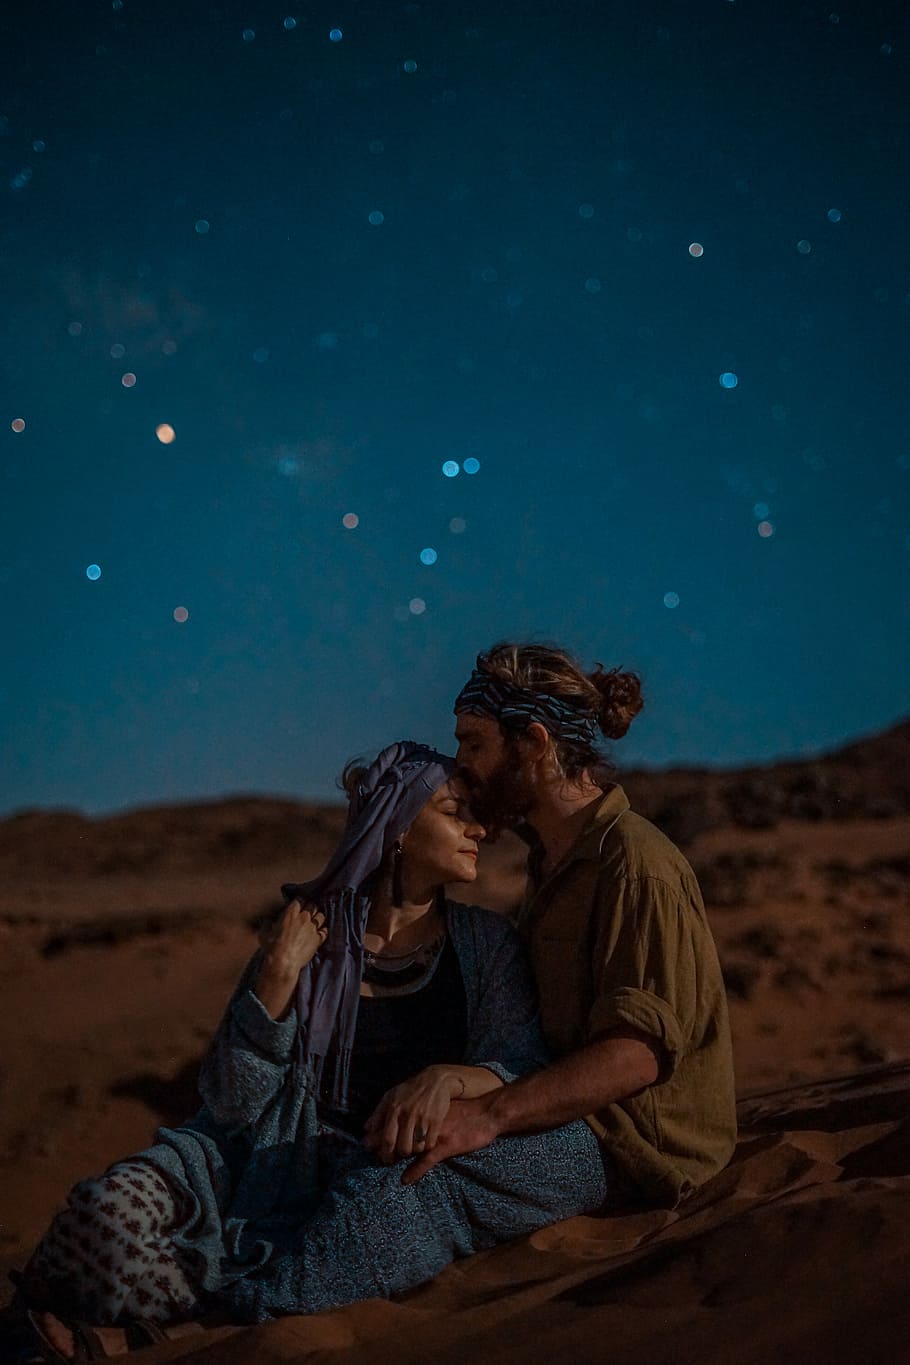 man and woman sitting on desert sand under blue sky during nighttime, man kissing woman's forehead